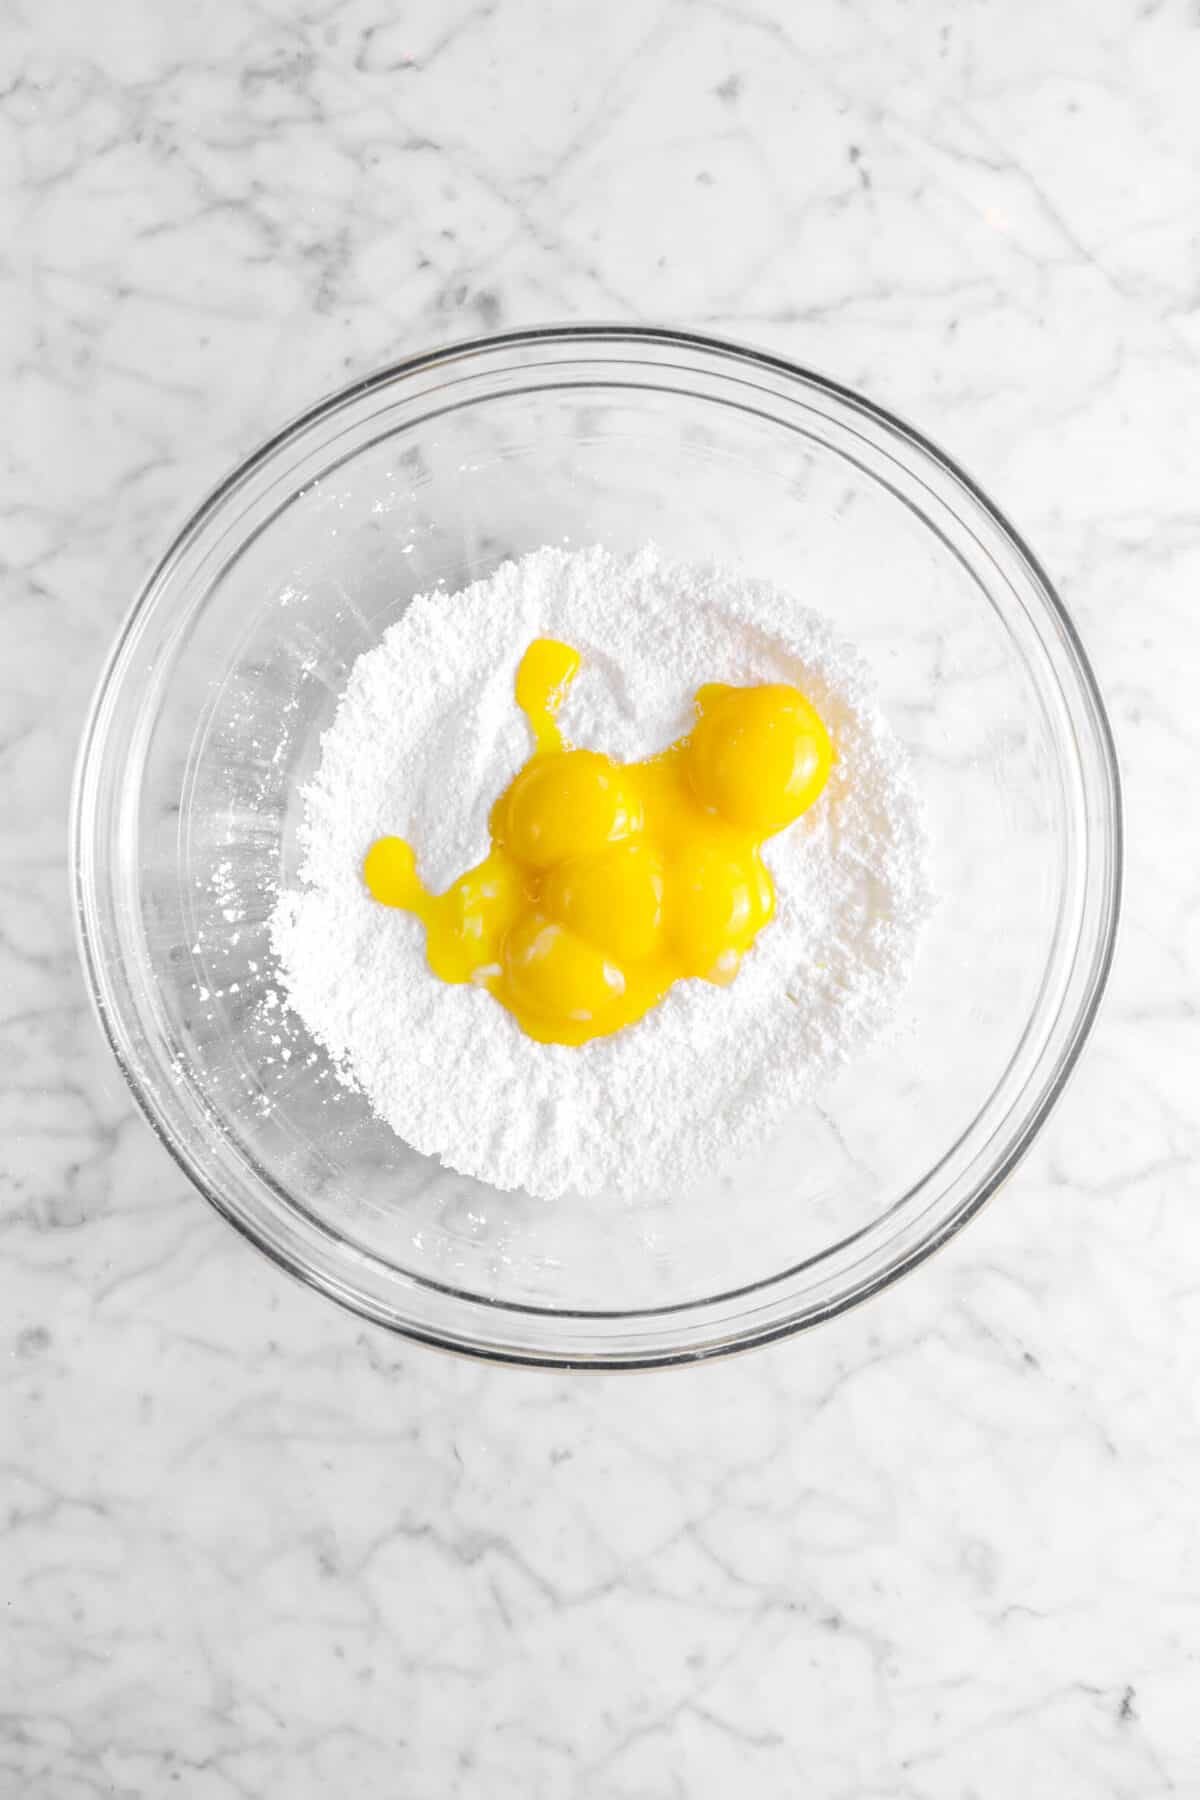 egg yolks in on top of corn starch mixture